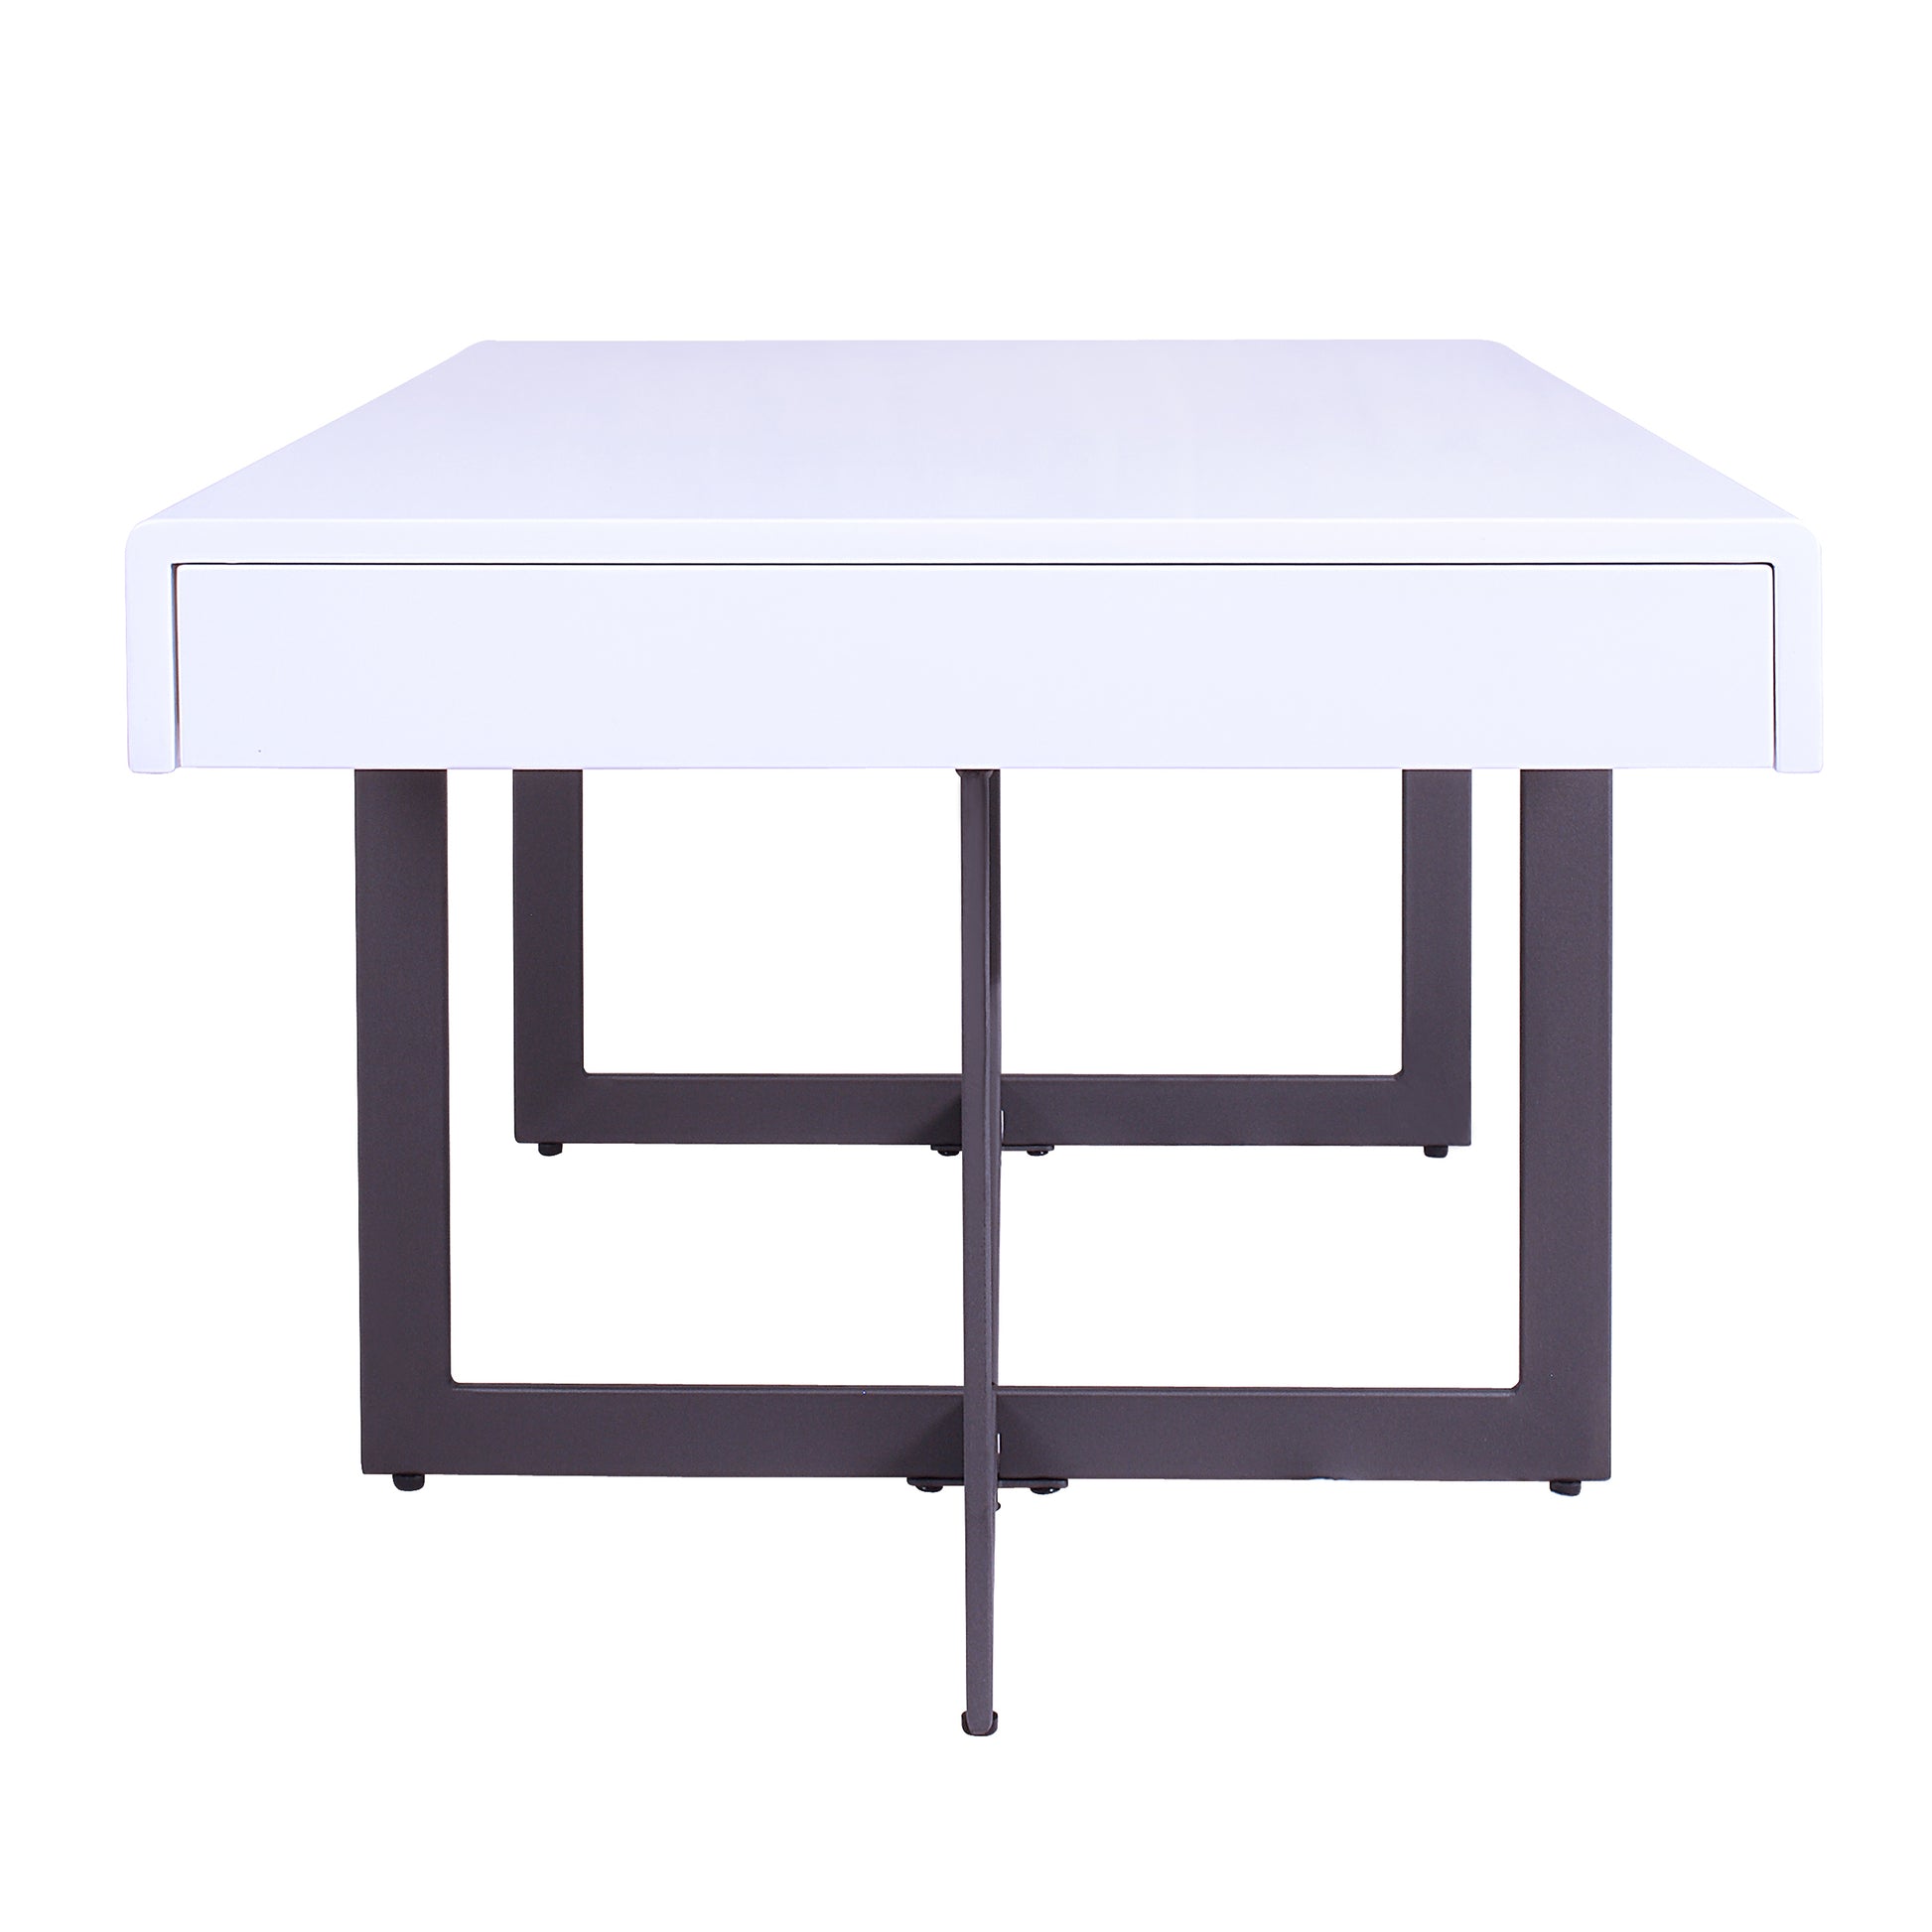 Front-facing side view of a modern white high gloss and gunmetal storage coffee table with hidden drawers on a white background